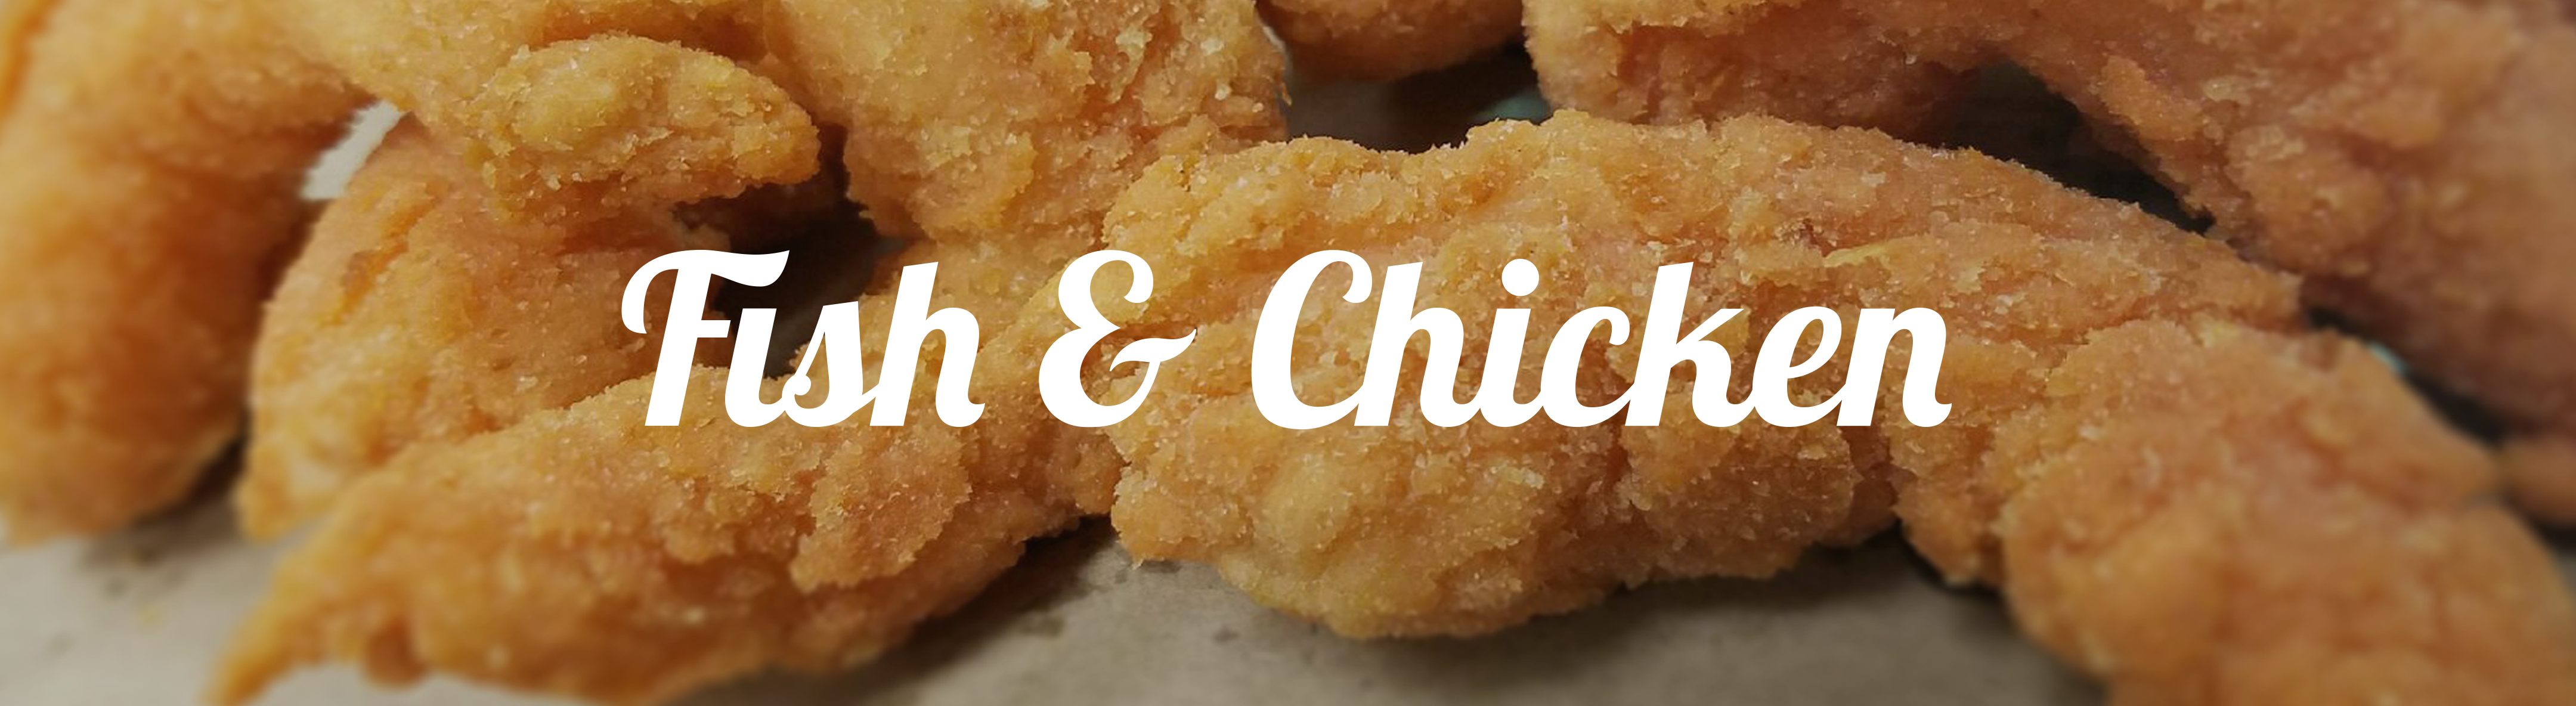 Chicago's Best Fried Shrimp and Chicken